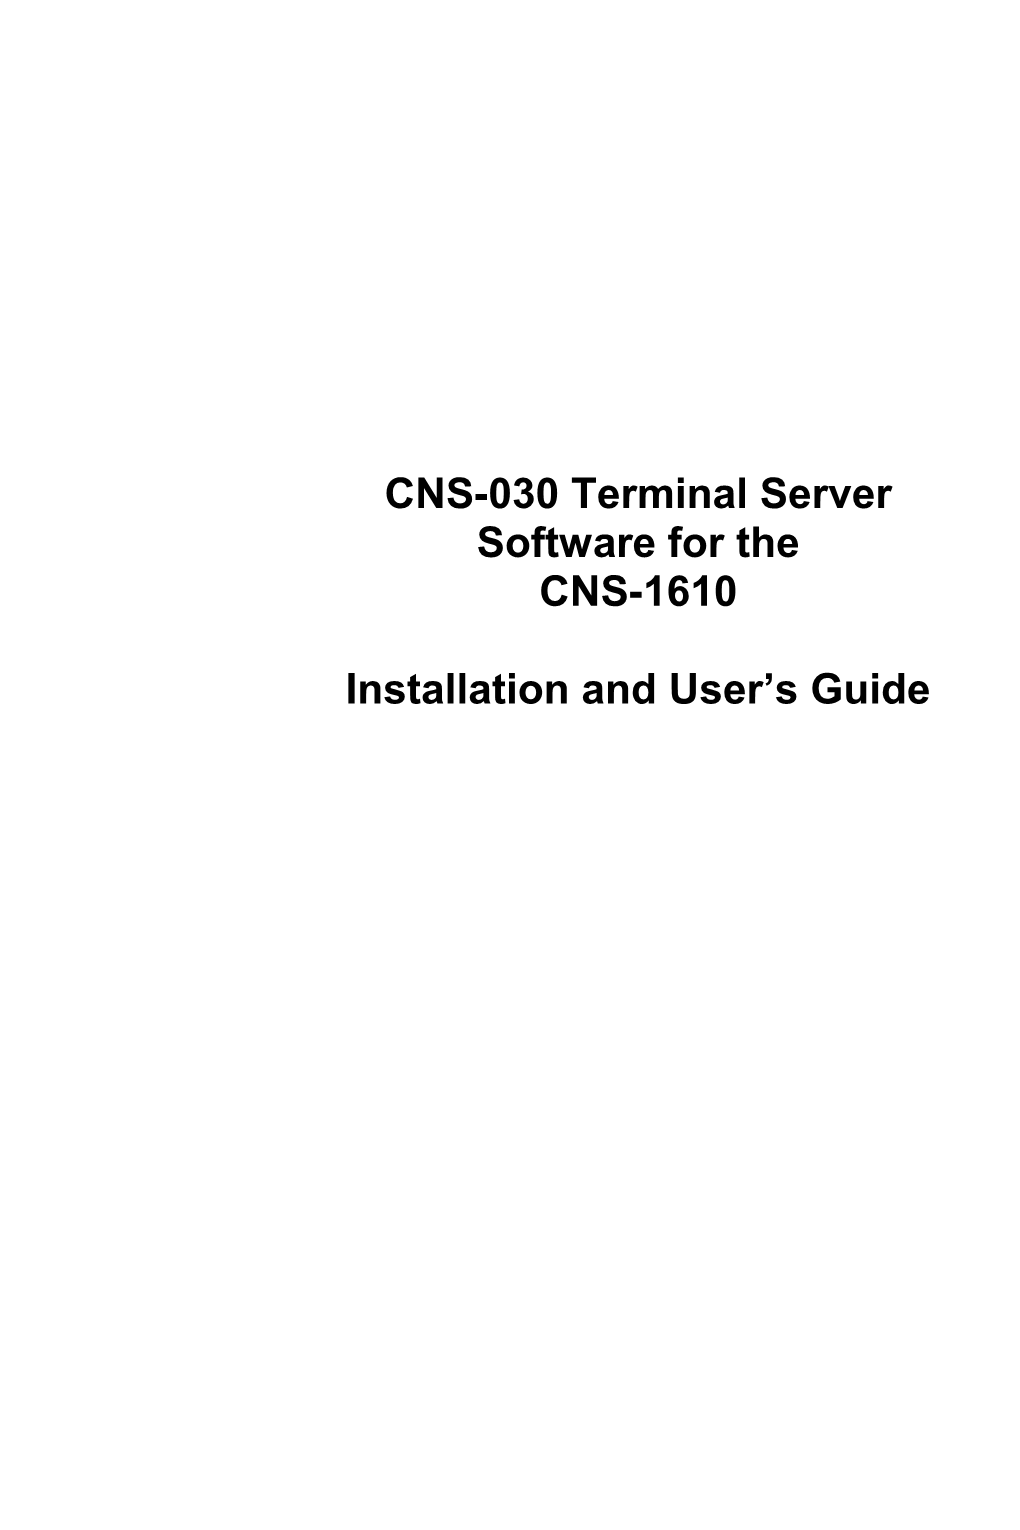 CNS-1610 TCP/IP Communications Software Installation and User's Guide